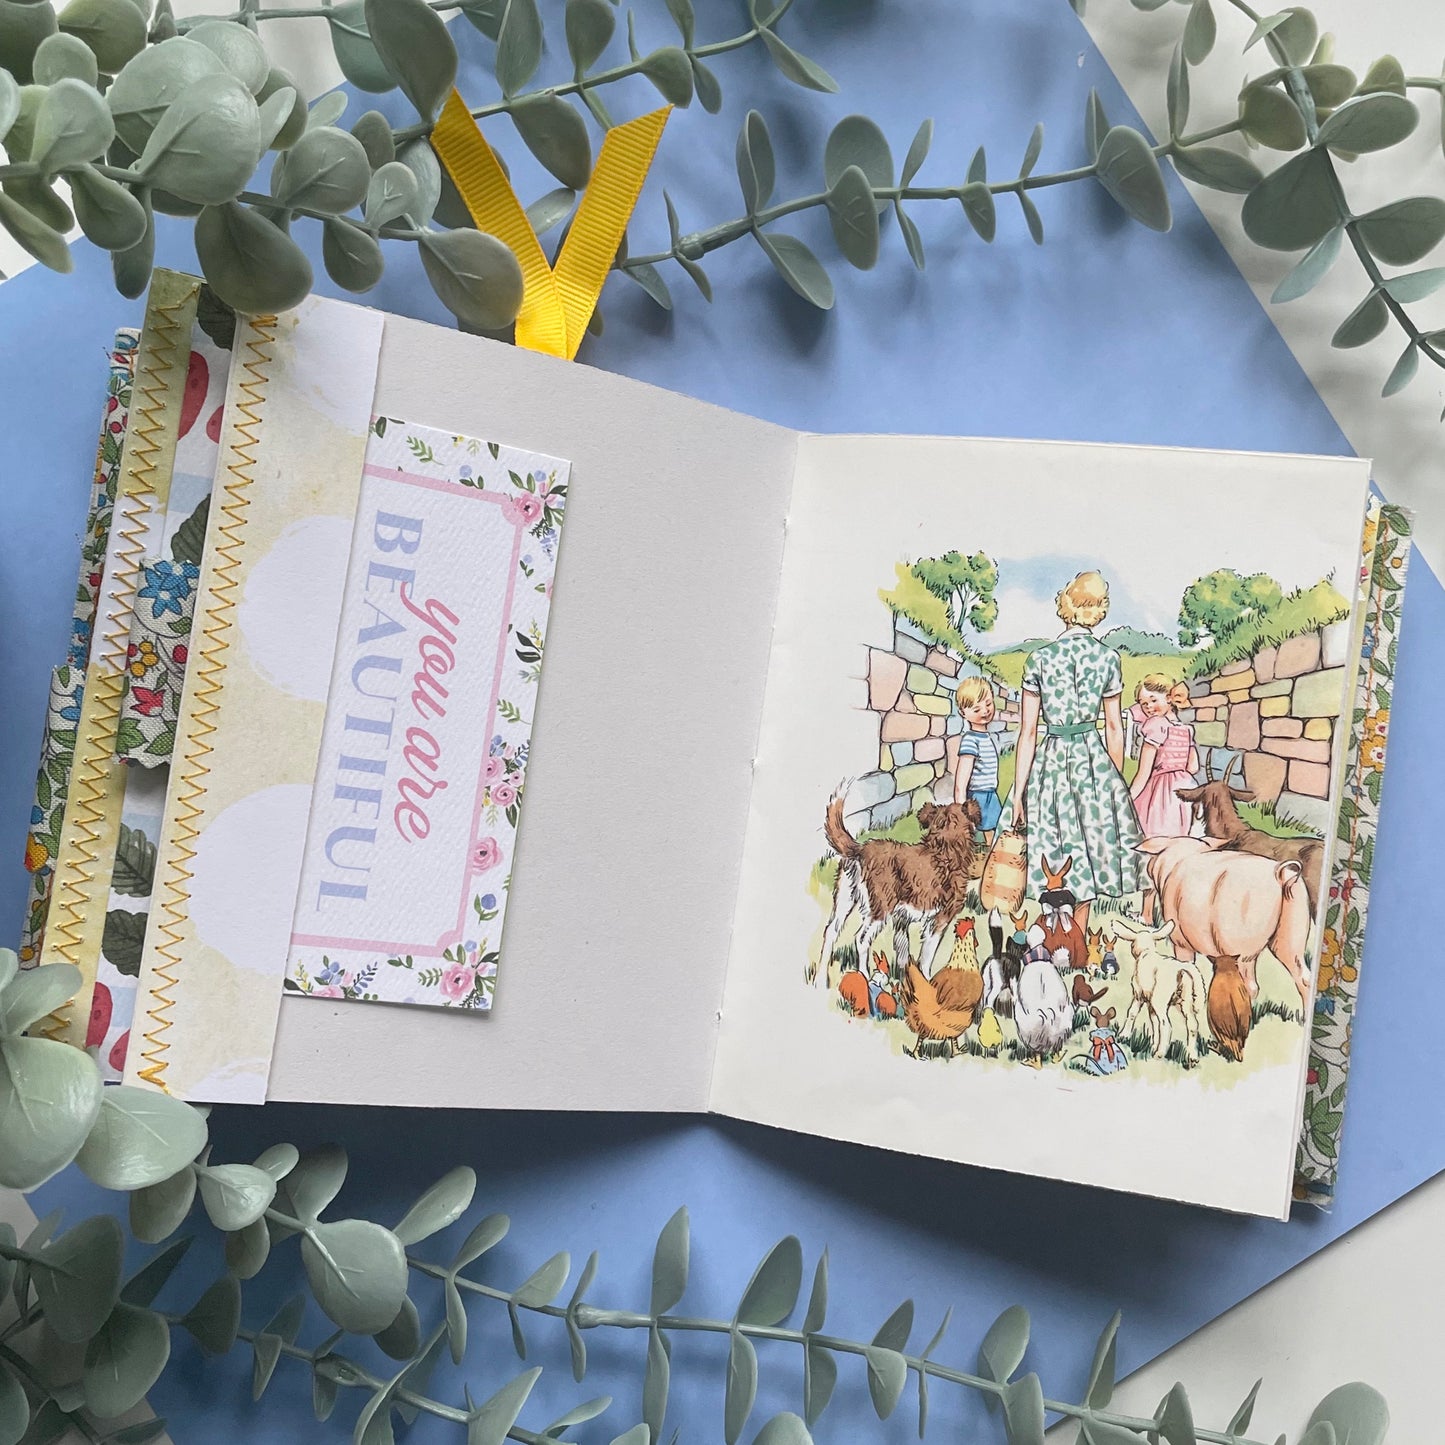 Handmade Soft Cover Upcycled Memory Keeping Journal - The Birthday Picnic at Blackberry Farm